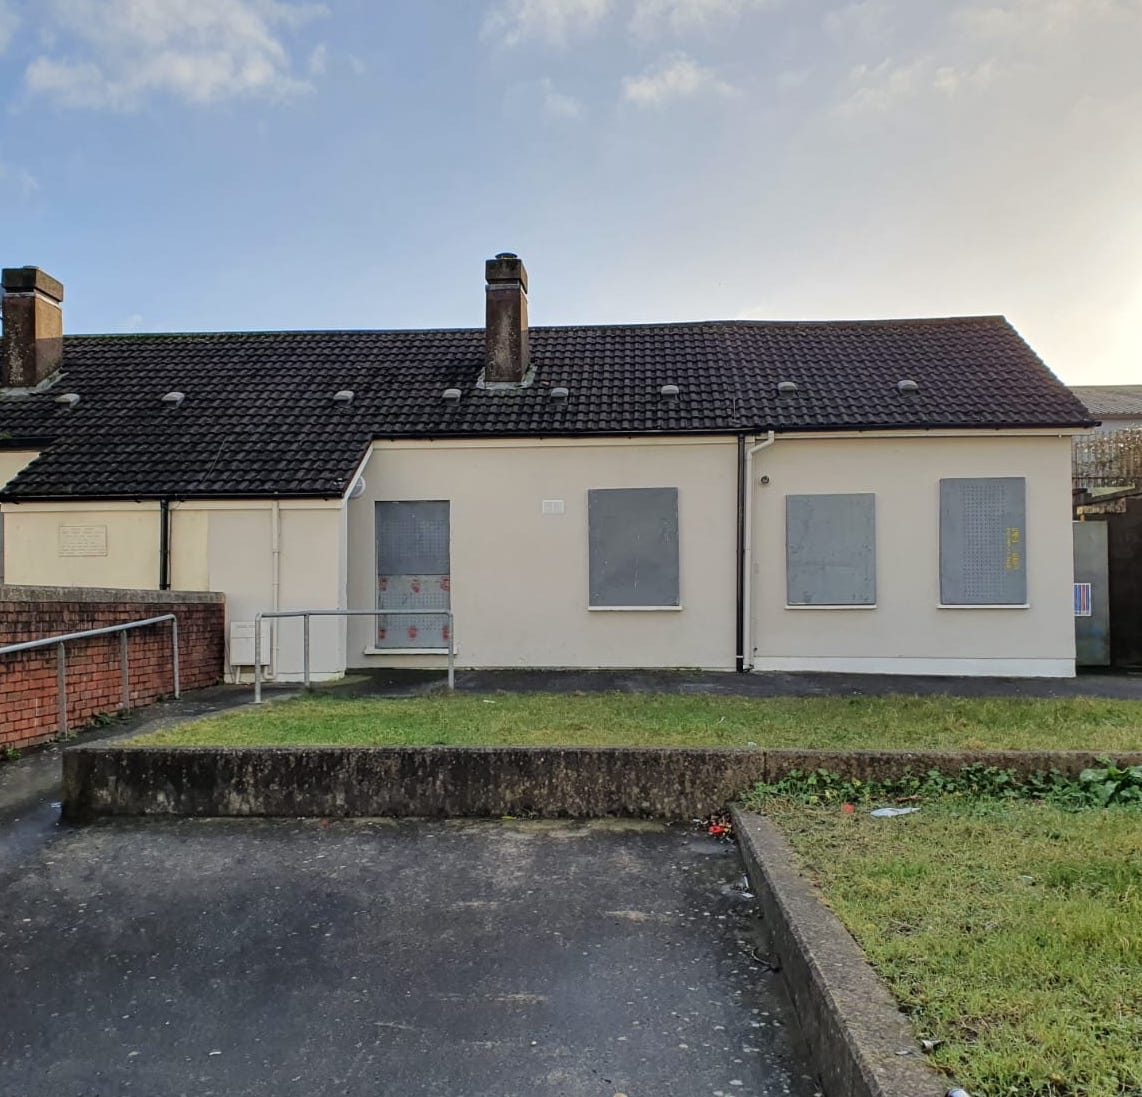 On the tenth day of Christmas Cork city gave to meYet again another empty home #12homesofChristmas  #InThisTogetherNo.239  #HousingForAll  #Ireland  #homeless  #Wellbeing  #Economy